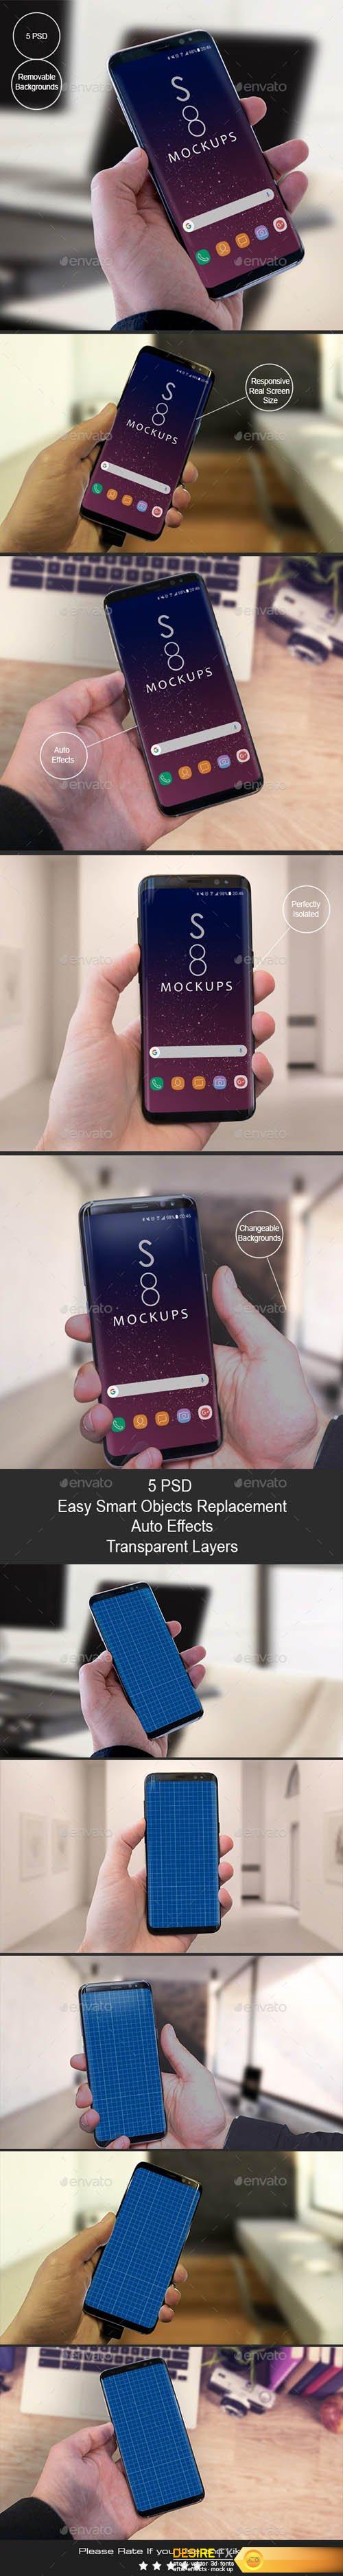 S8 Galaxy Modern Android Mockups-Apps Ui Showcase 19727219